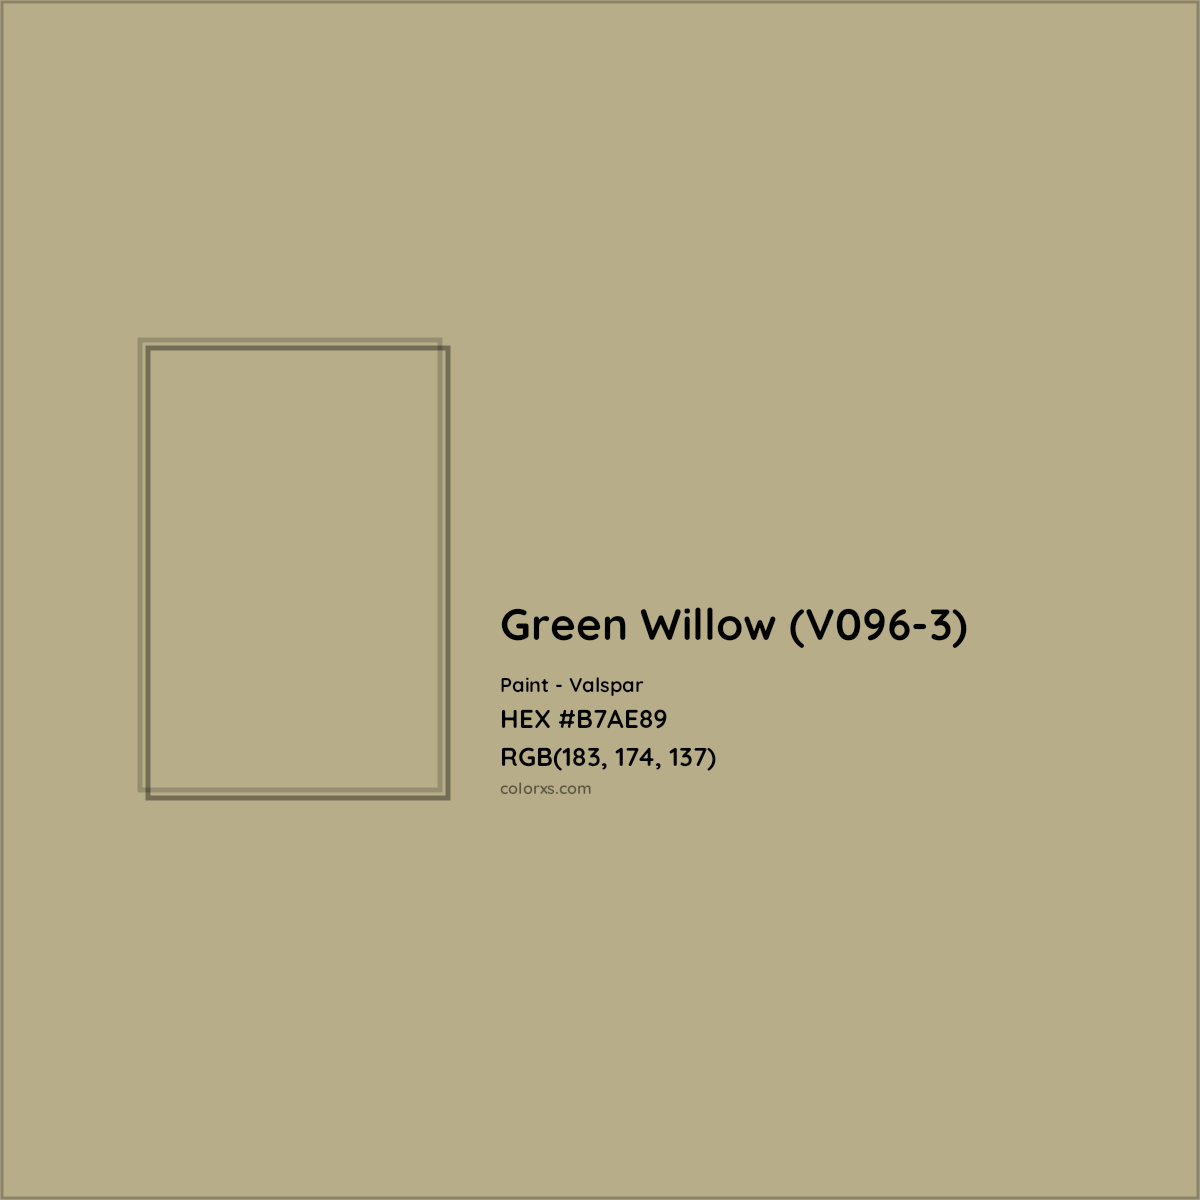 HEX #B7AE89 Green Willow (V096-3) Paint Valspar - Color Code